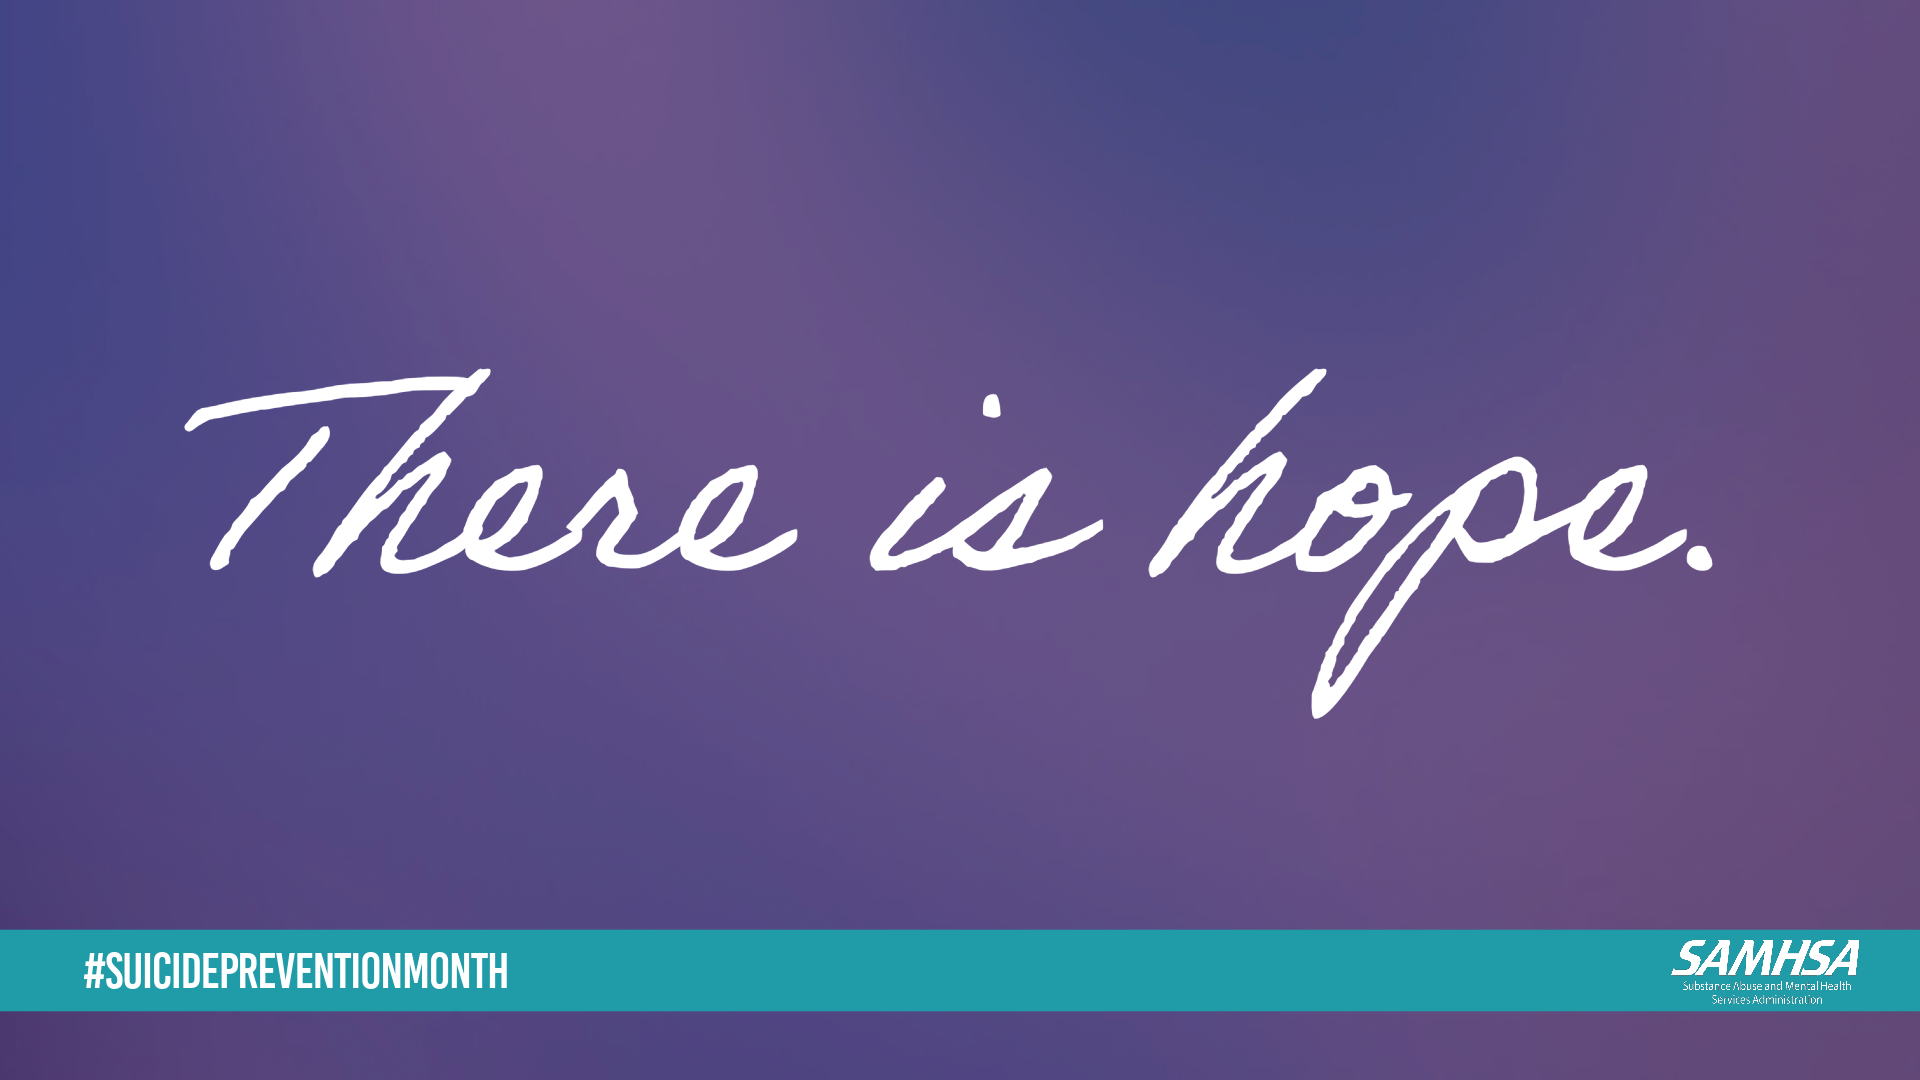 SAMHSA Suicide Prevention Month 2023 "There is Hope" Image